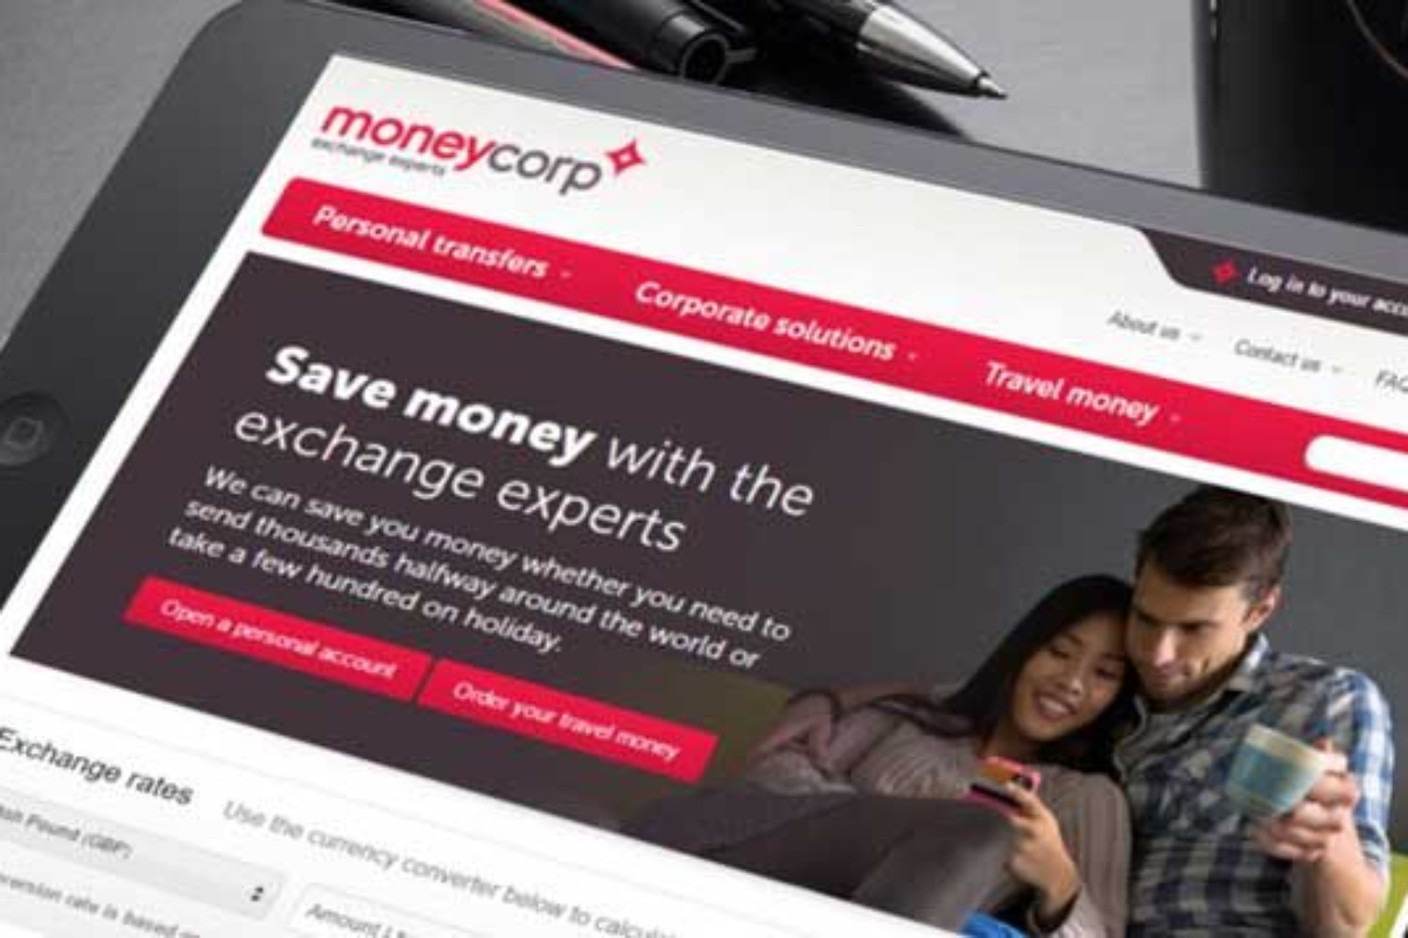 Moneycorp continues its European expansion with the registration of a company in Luxembourg. Photo: Moneycorp